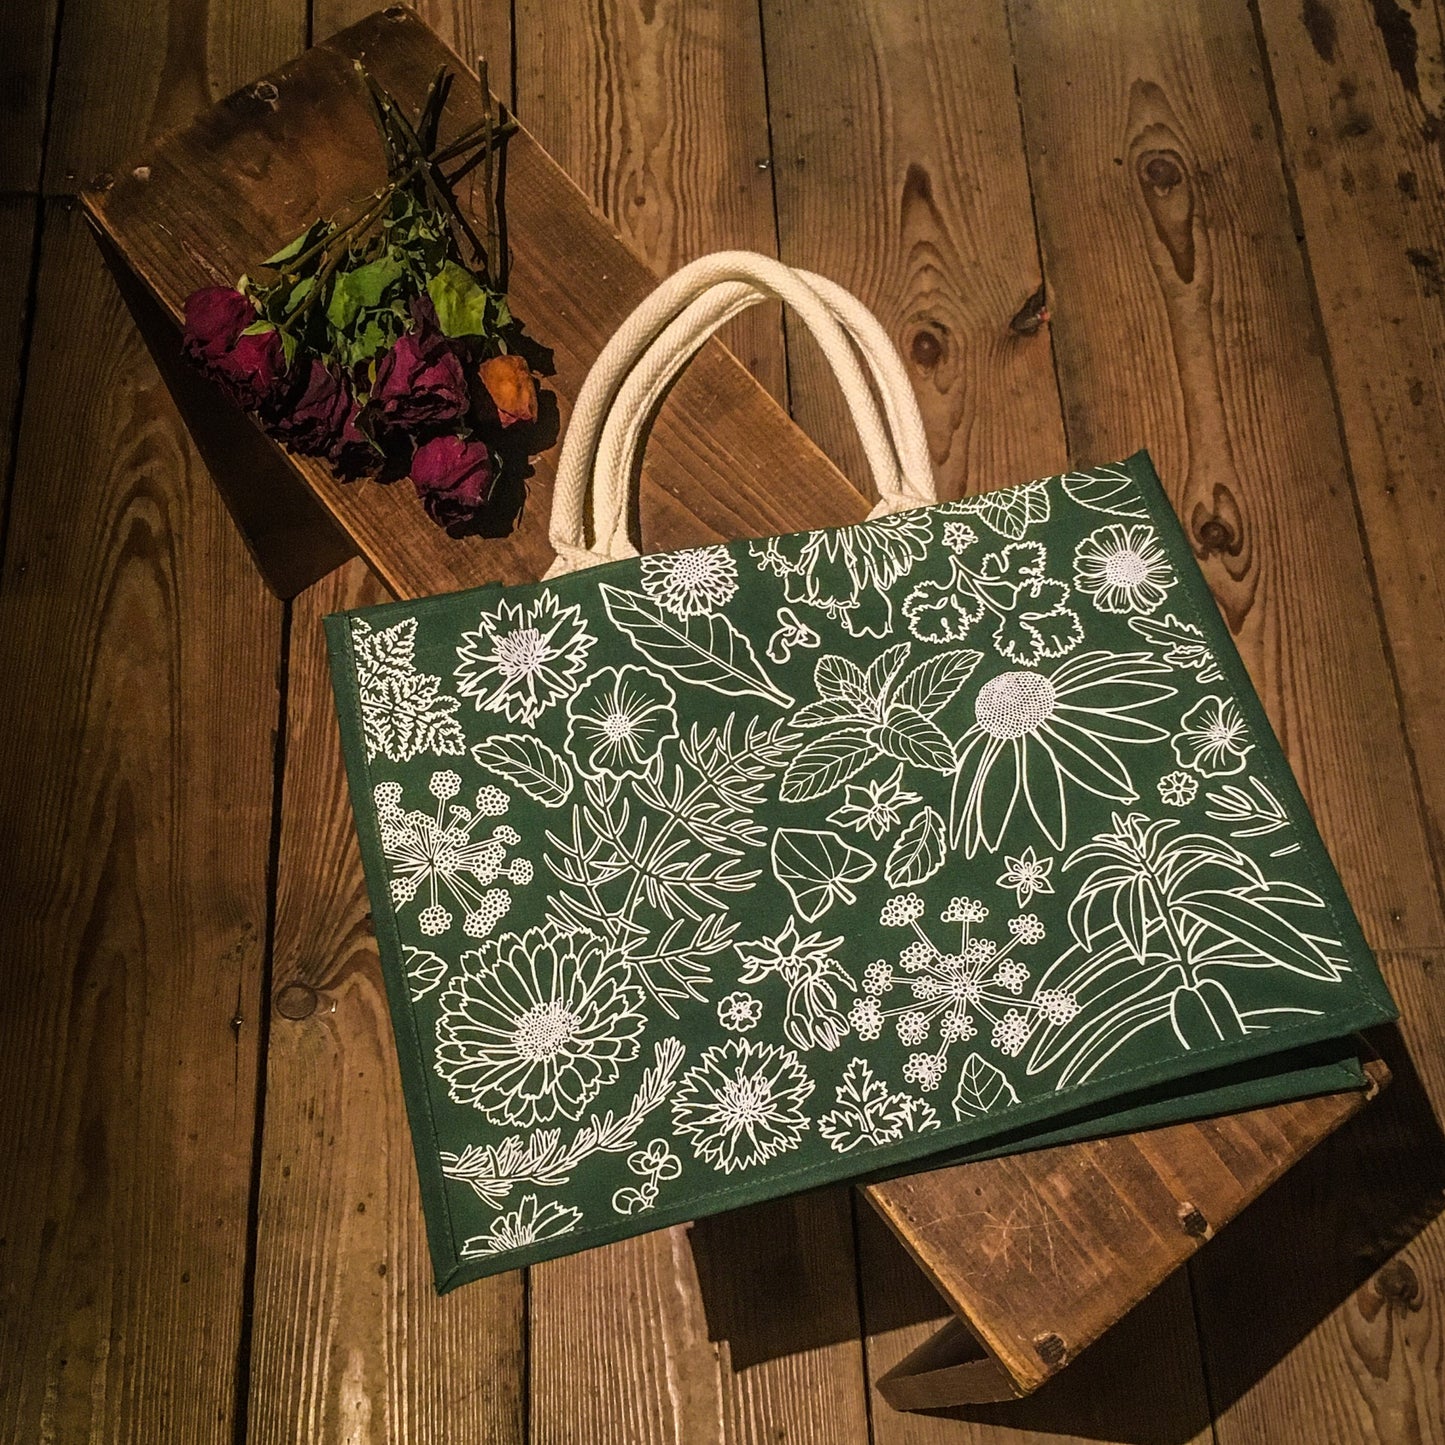 Green bag with white outline decoration of flowers and leaves, placed on a wooden bench next to some dried roses